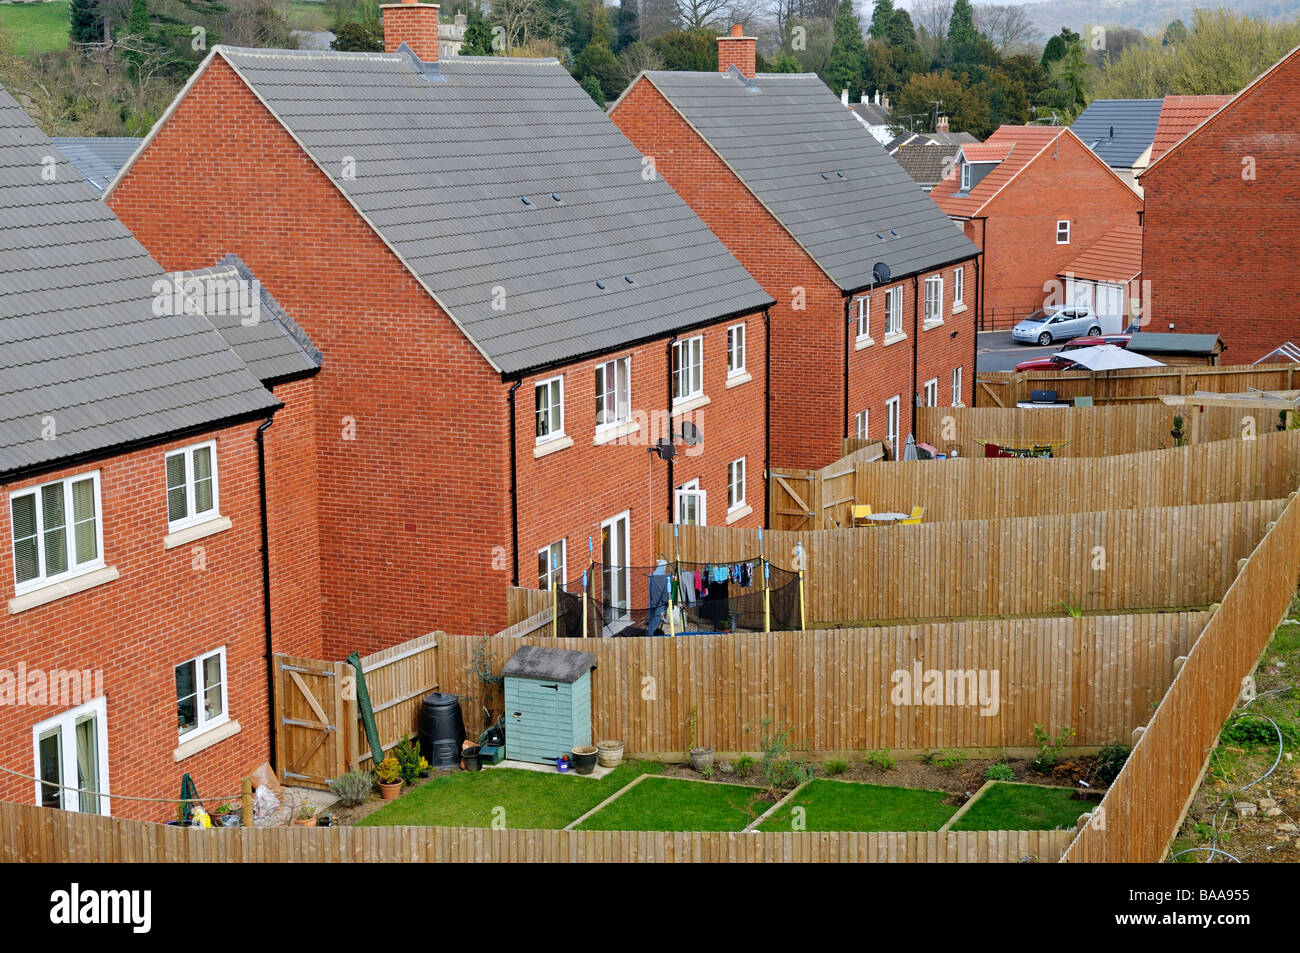 Backs of houses with gardens in modern brick built housing estate Dursley Gloucestershire England Stock Photo